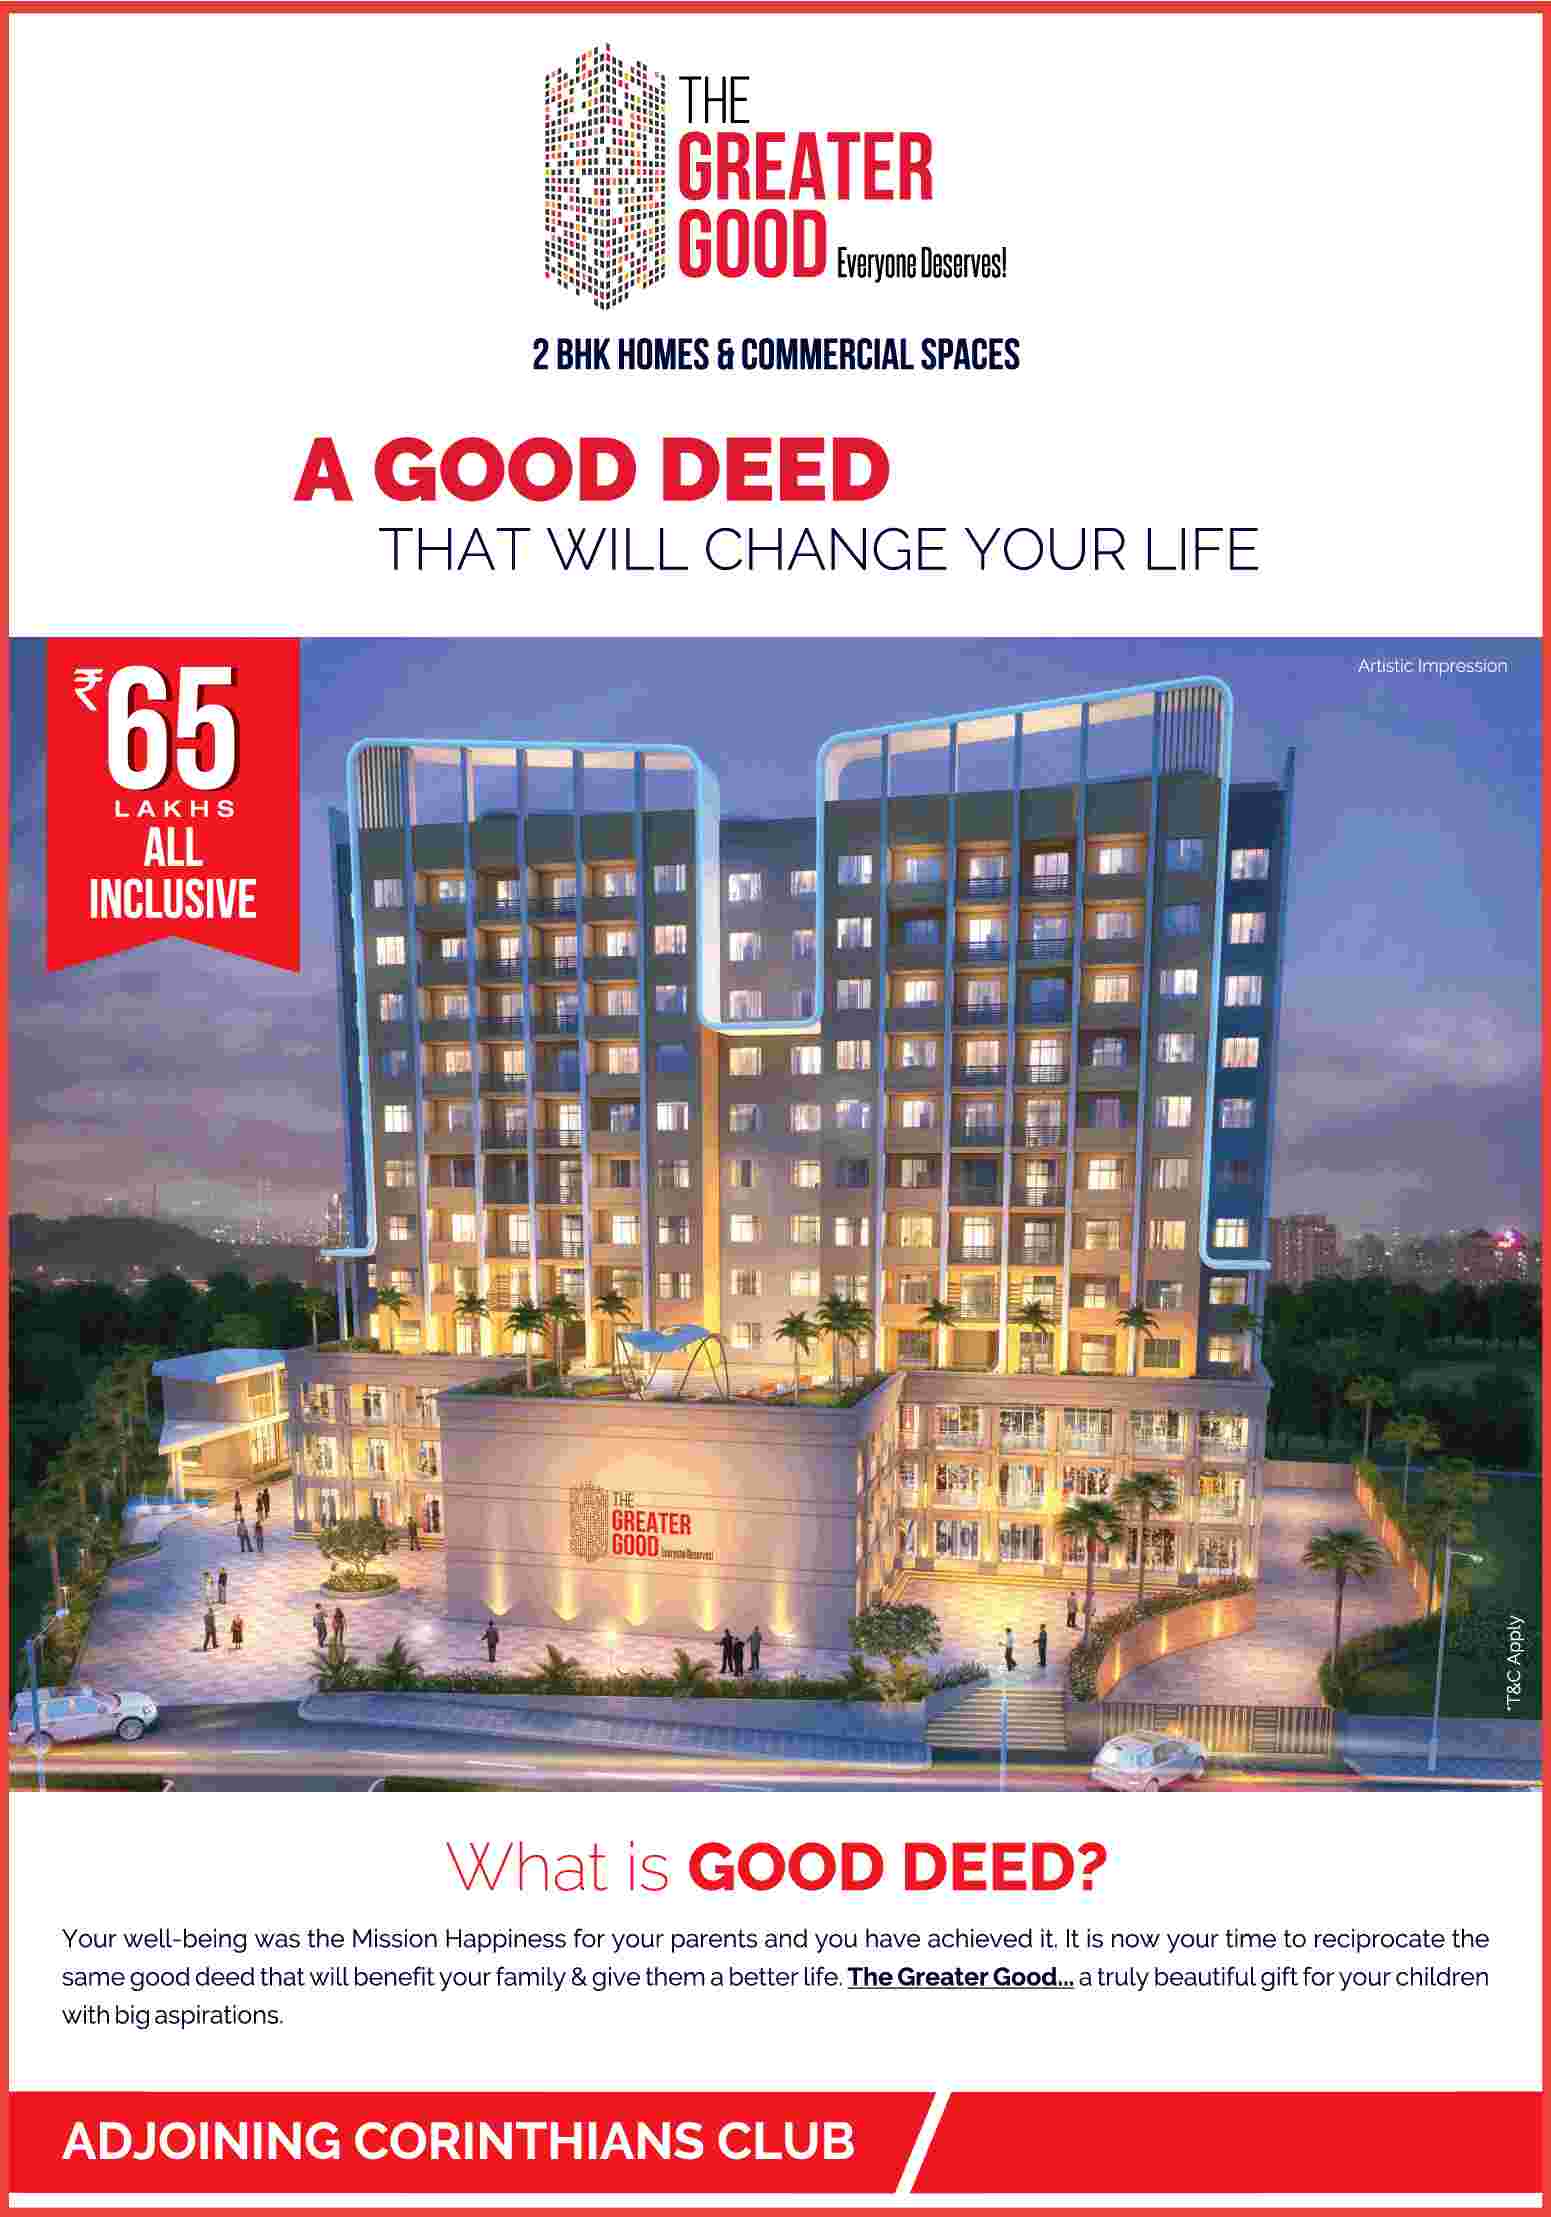 Book your home @ 65 Lakhs all inclusive at GKG The Greater Good in Pune